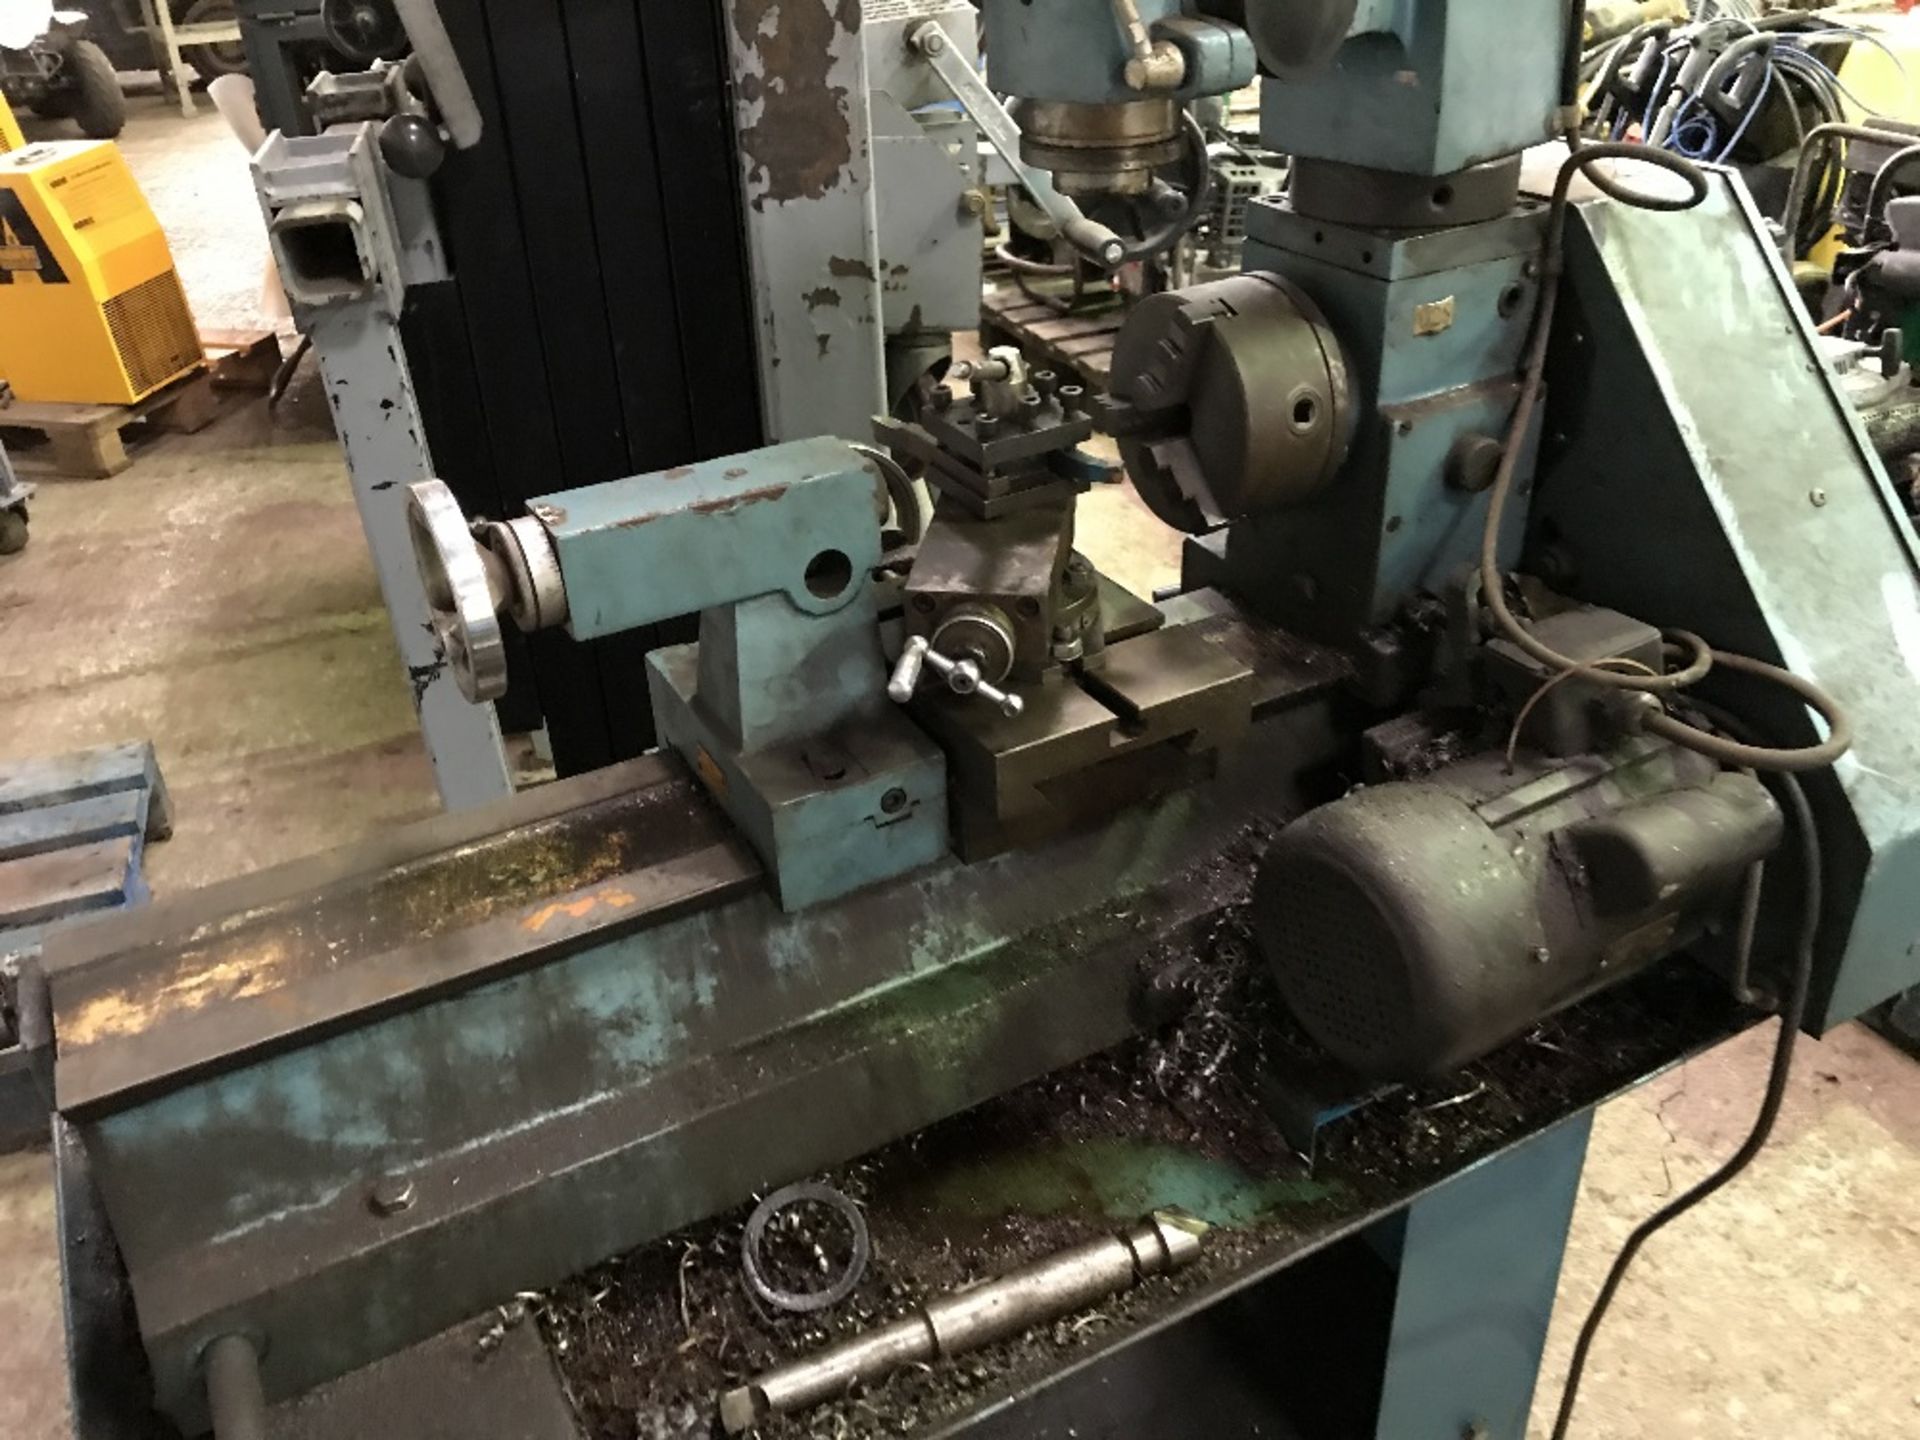 CLARKE METAL WORKER 12 SPEED MILL/DRILL/LATHE, DIRECT FROM COMPANY LIQUIDATION - Image 3 of 4